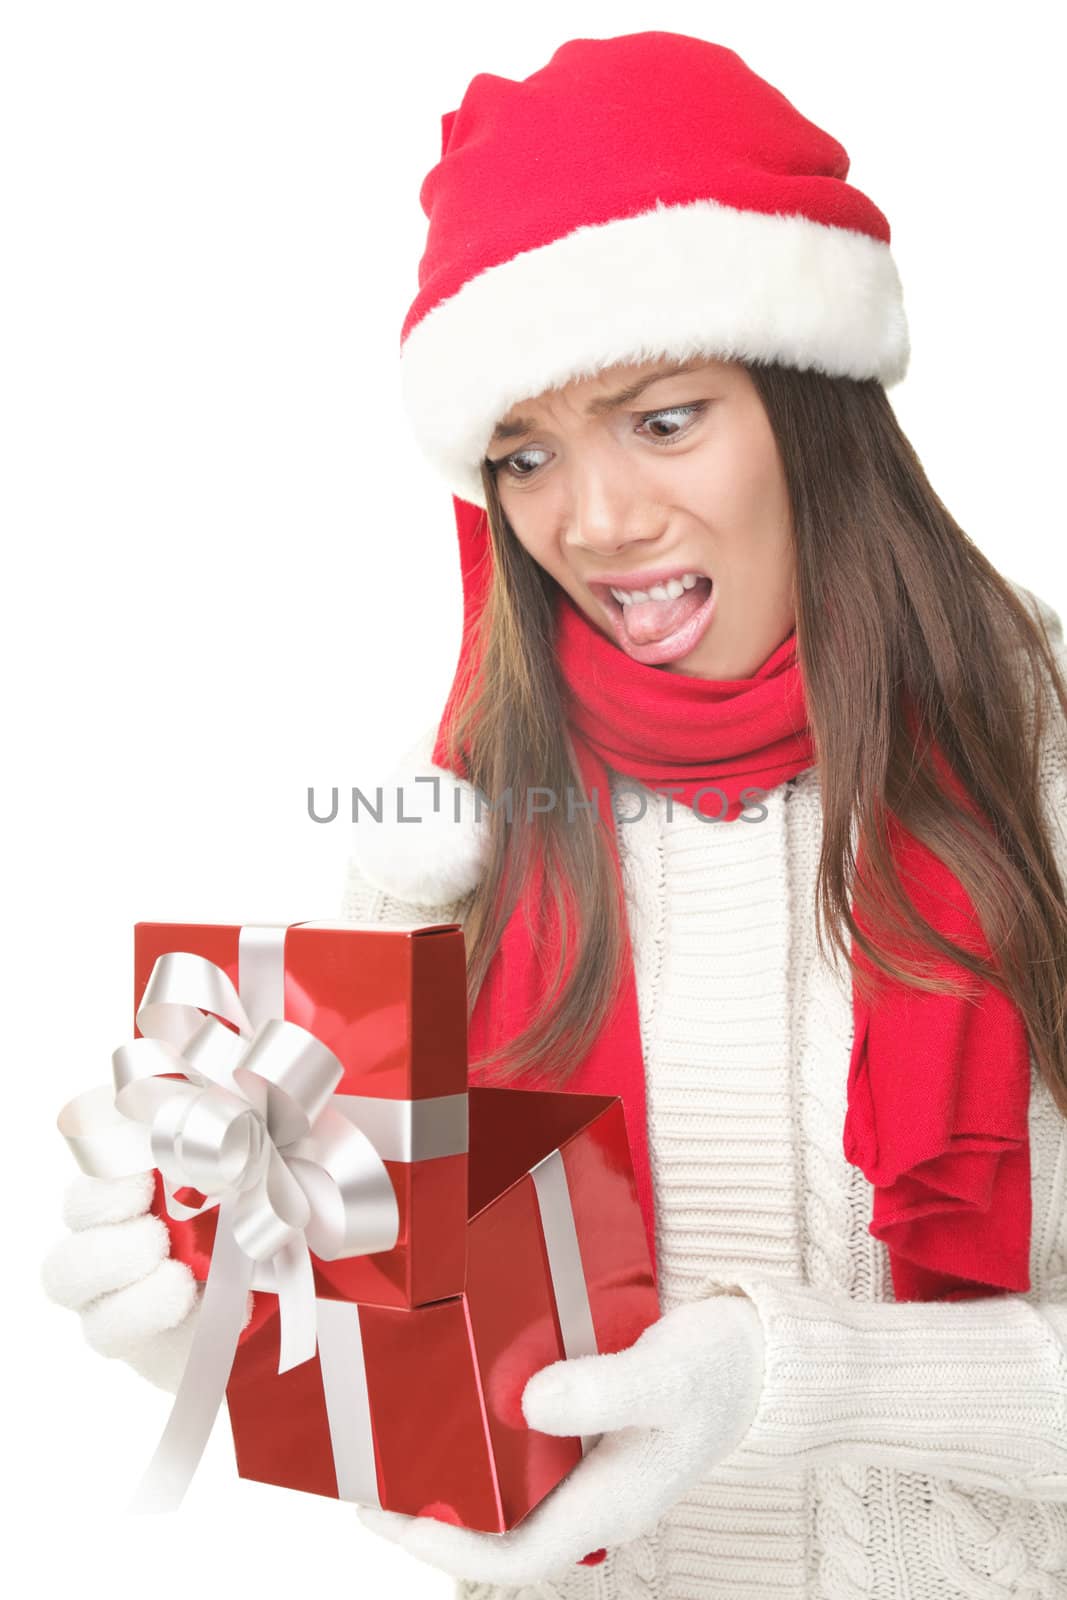 Christmas Gift - woman opening gift disappointed and unhappy, Young woman in Santa hat. Funny cute photo of Asian / Caucasian woman isolated on white background. 